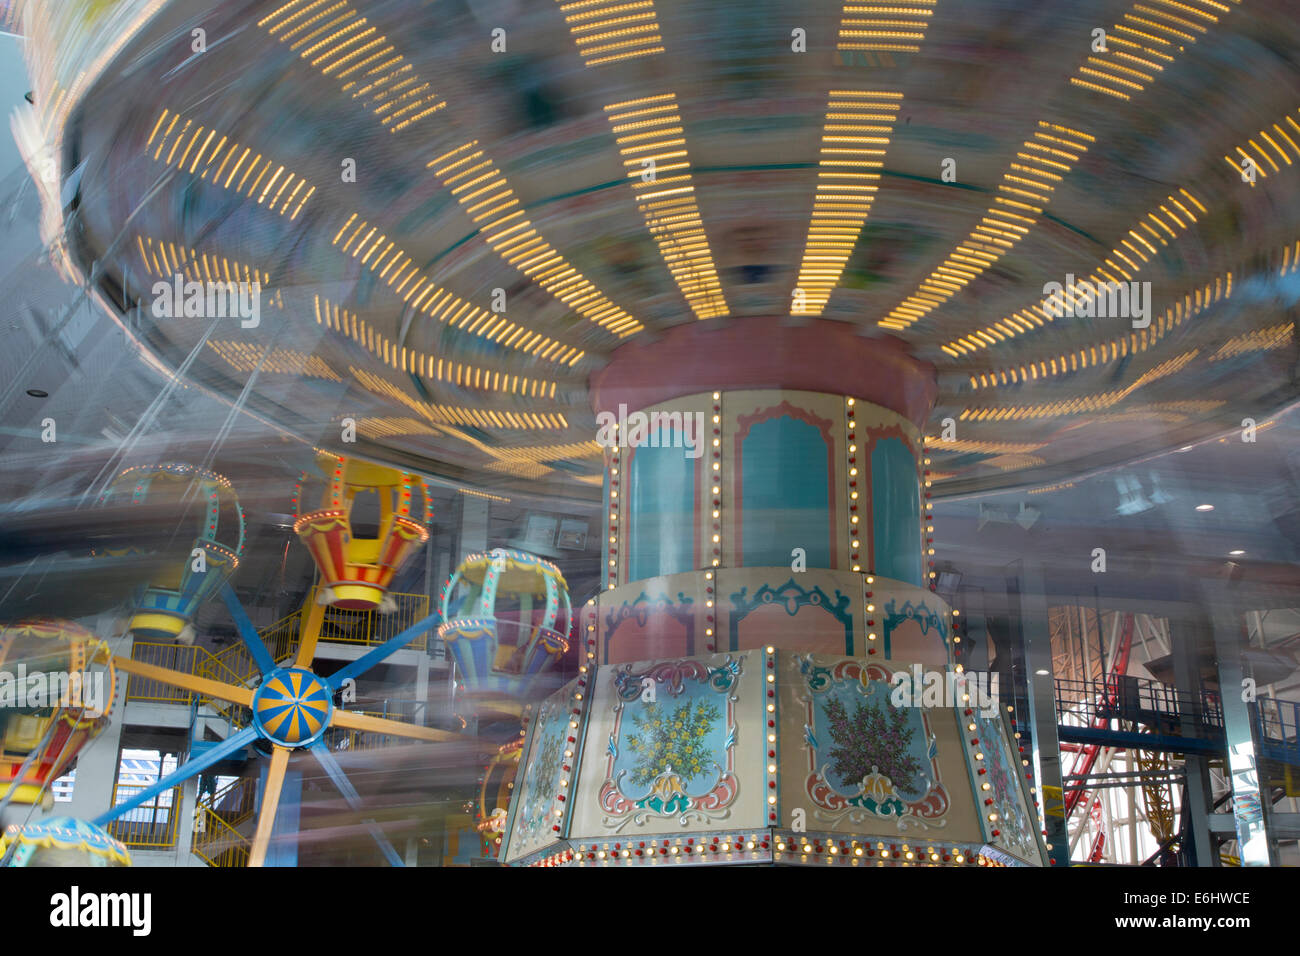 Carousel at Galaxyland, one of the world's largest indoor amusement parks, in West Edmonton mall Stock Photo